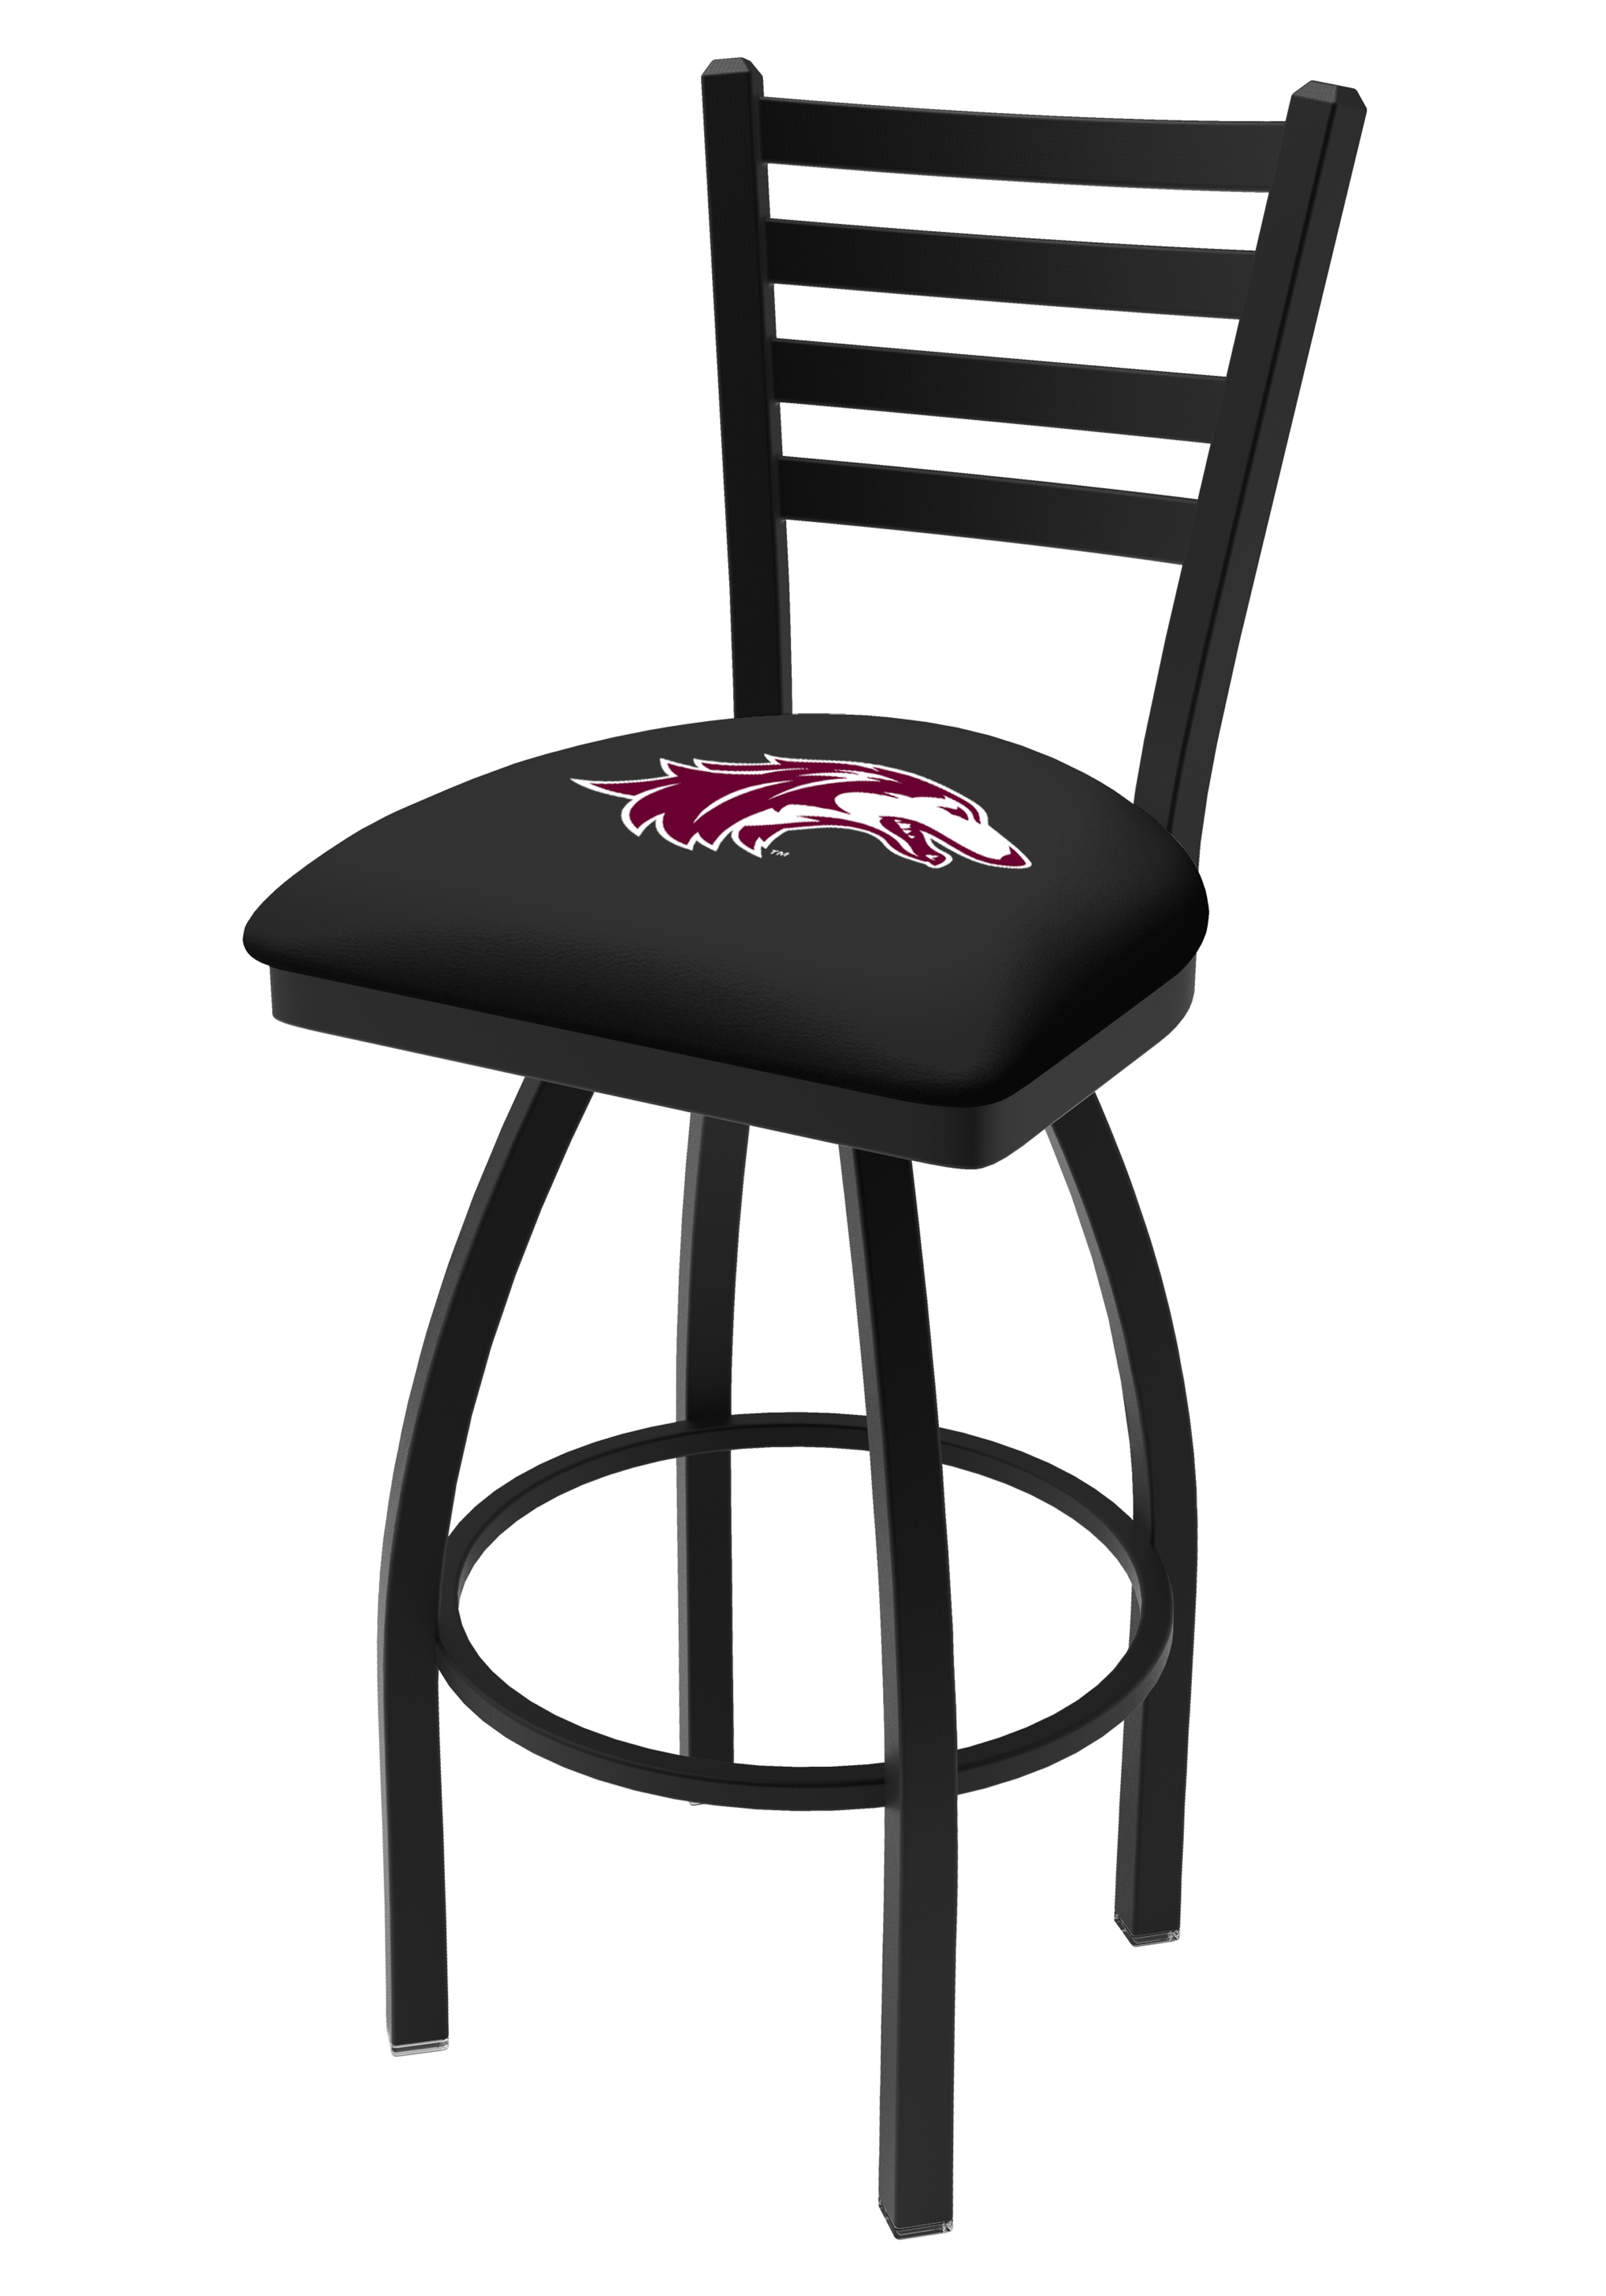 Picture of Holland Bar Stool L01430SouIll 30 in. Wrinkle Southern Illinois Bar Stool with Ladder Style Back